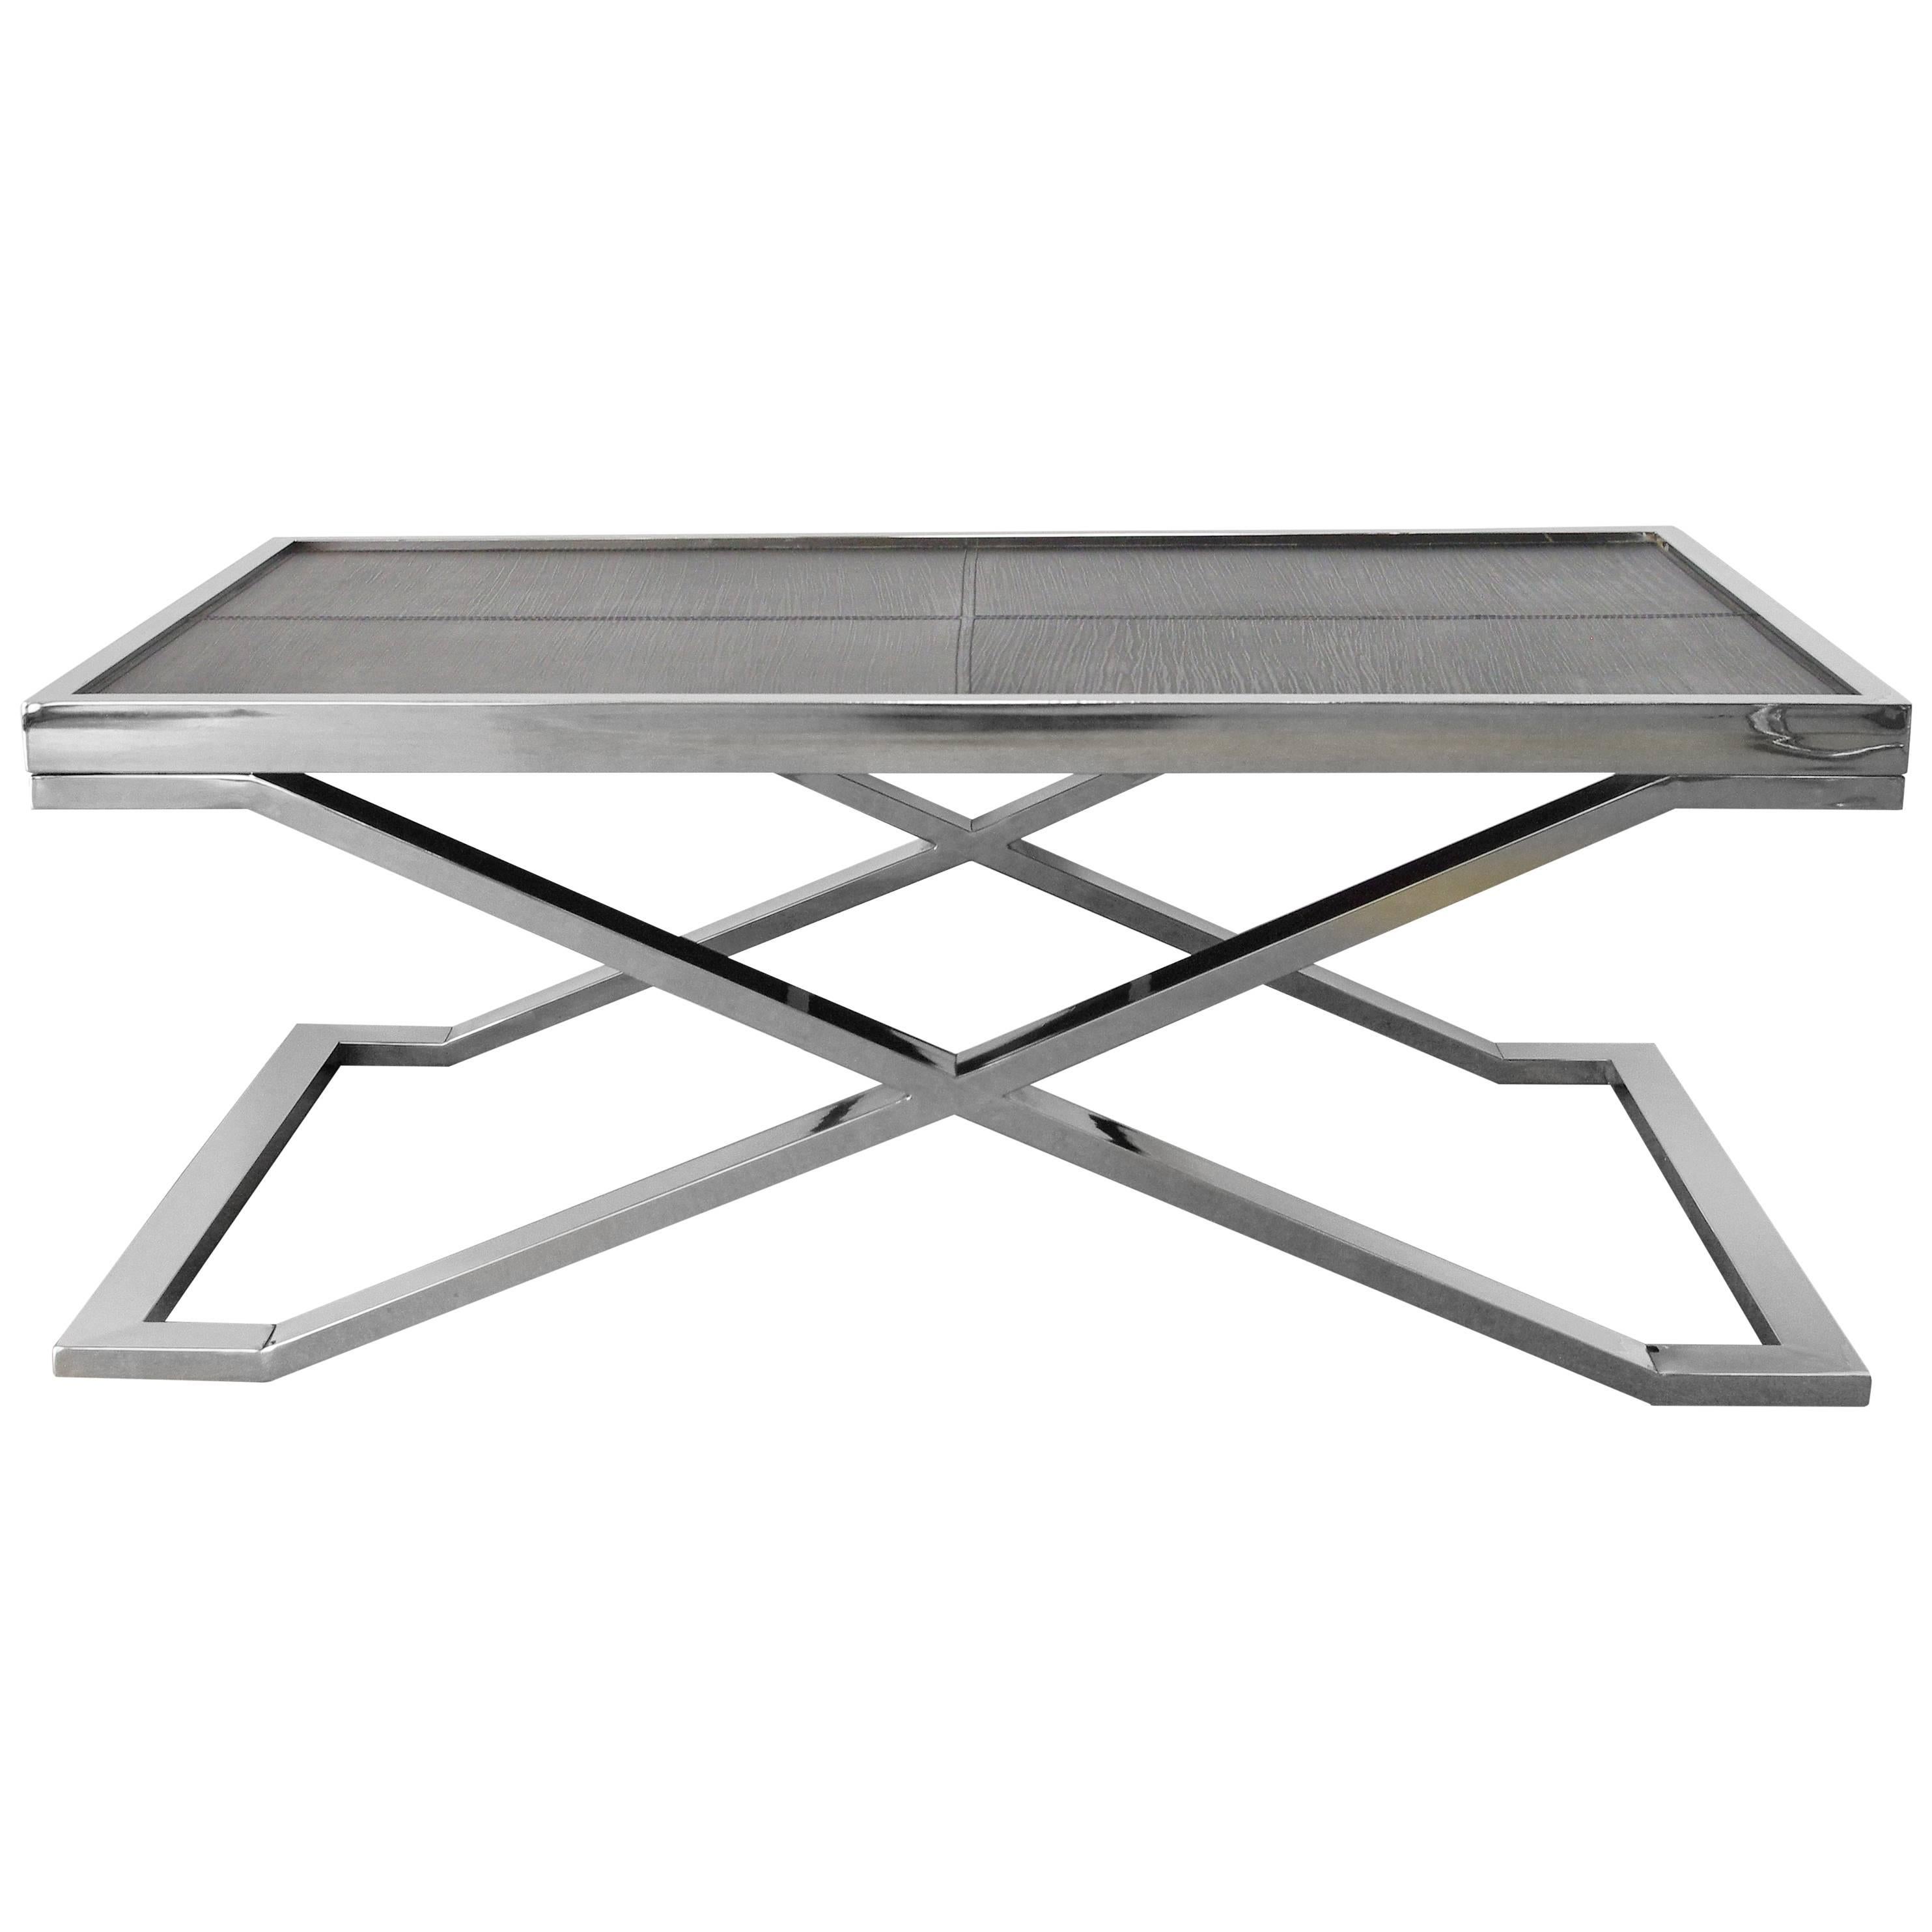 Black Leather and Stainless Steel Coffee Table by Fabio Ltd FINAL CLEARANCE SALE